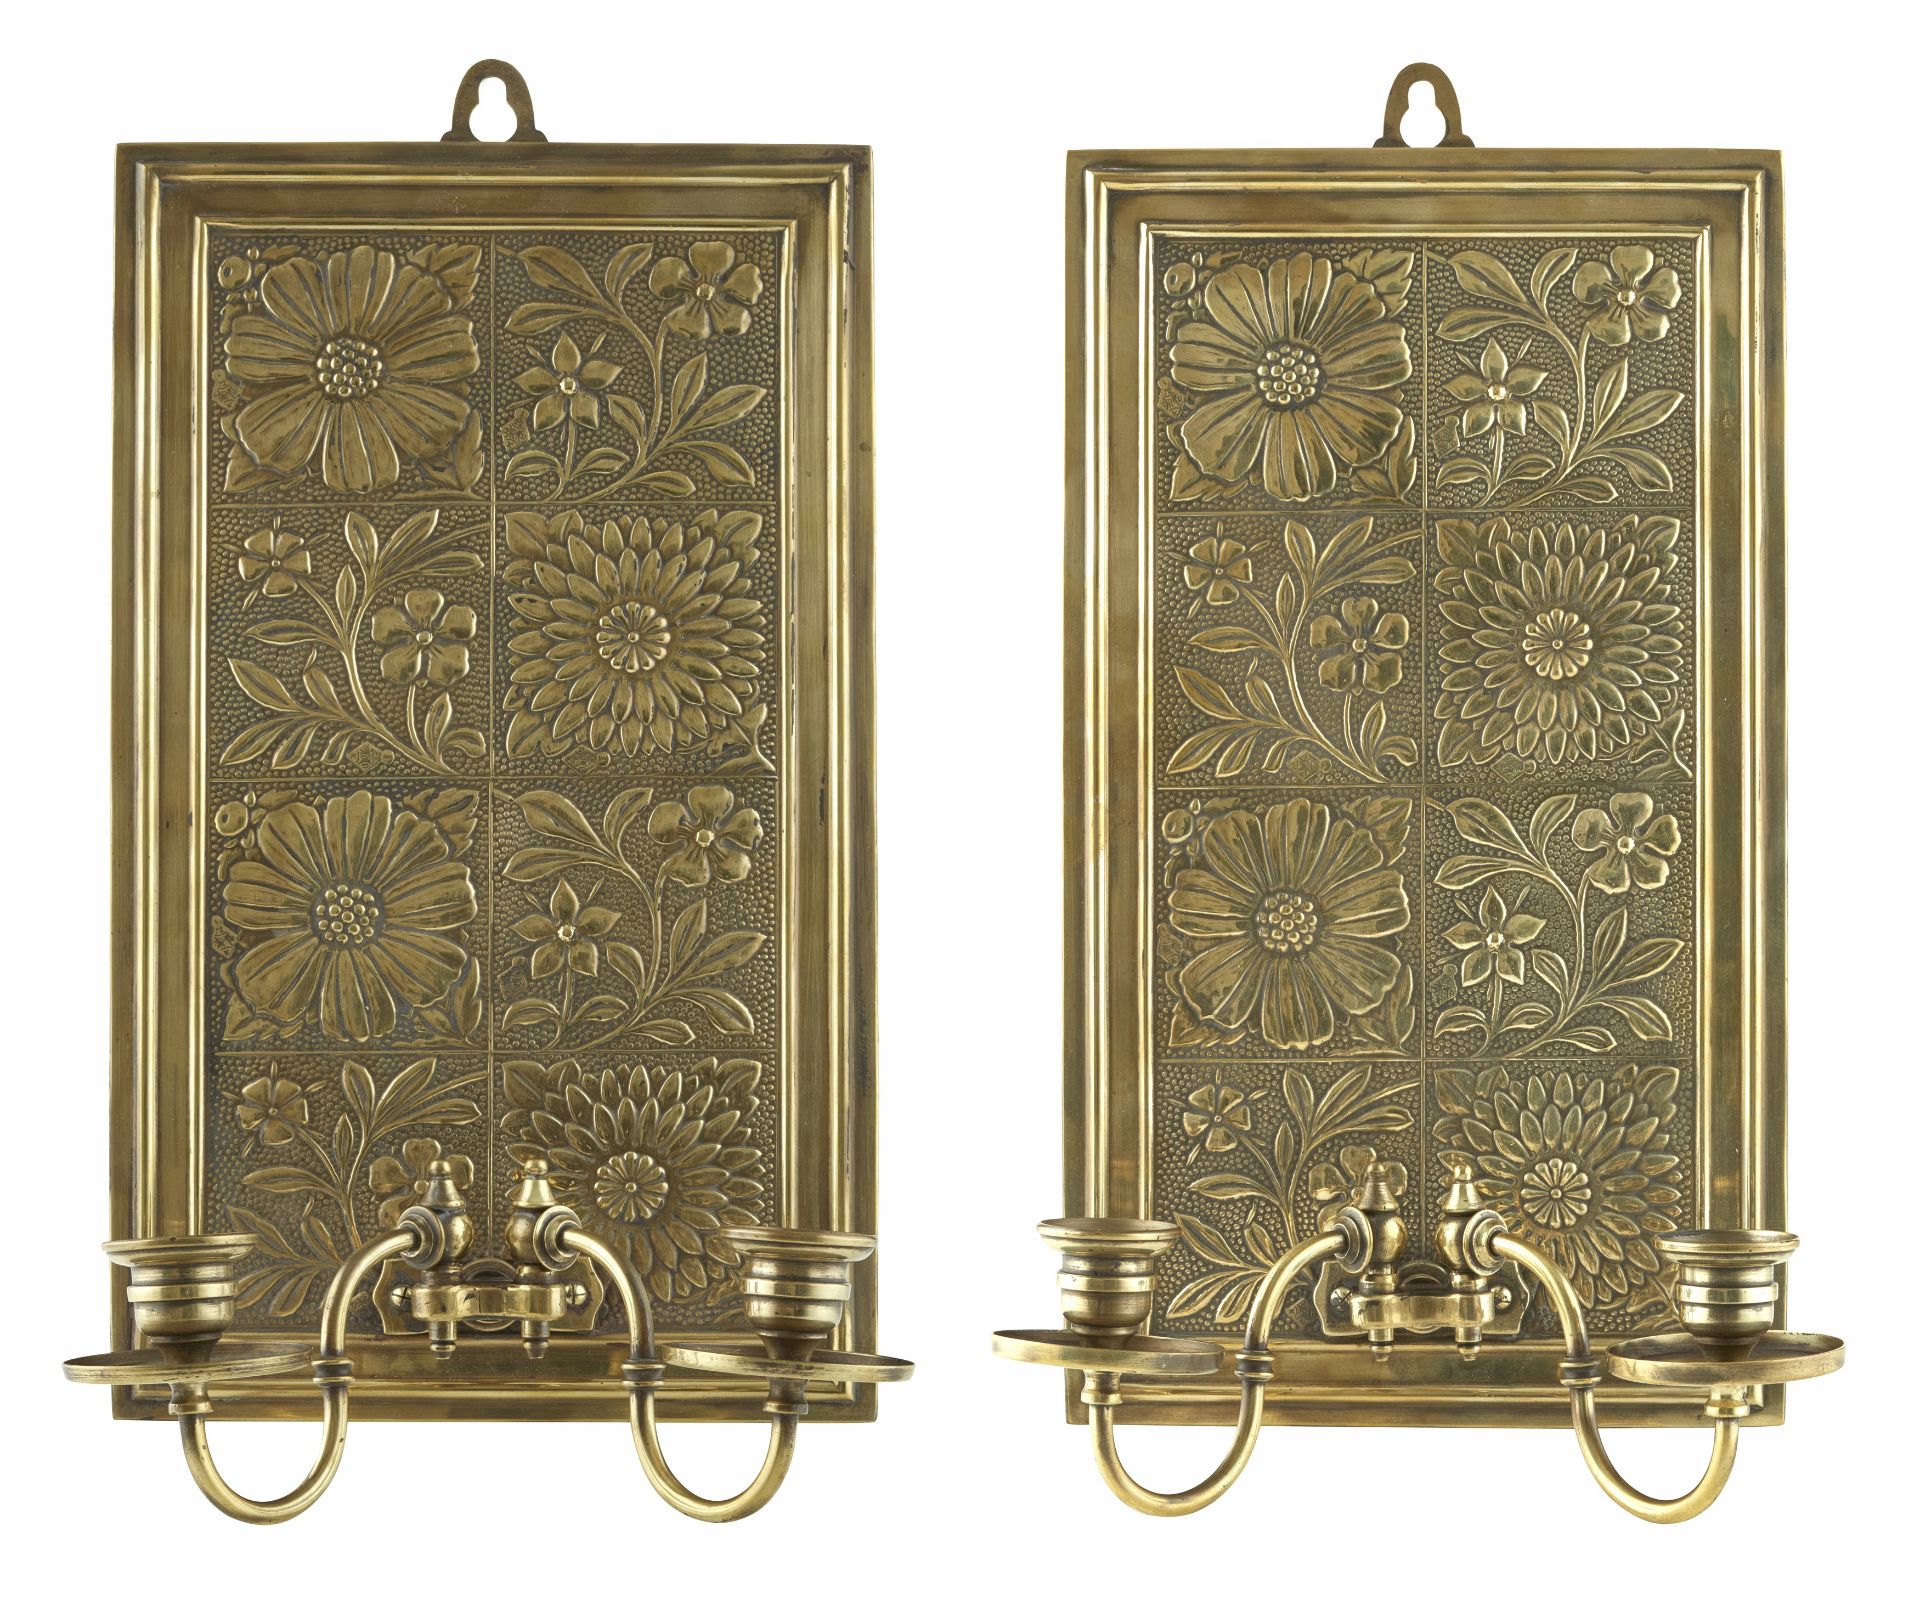 MANNER OF BRUCE J. TALBERT PAIR OF AESTHETIC MOVEMENT WALL SCONCES, DATED 1878